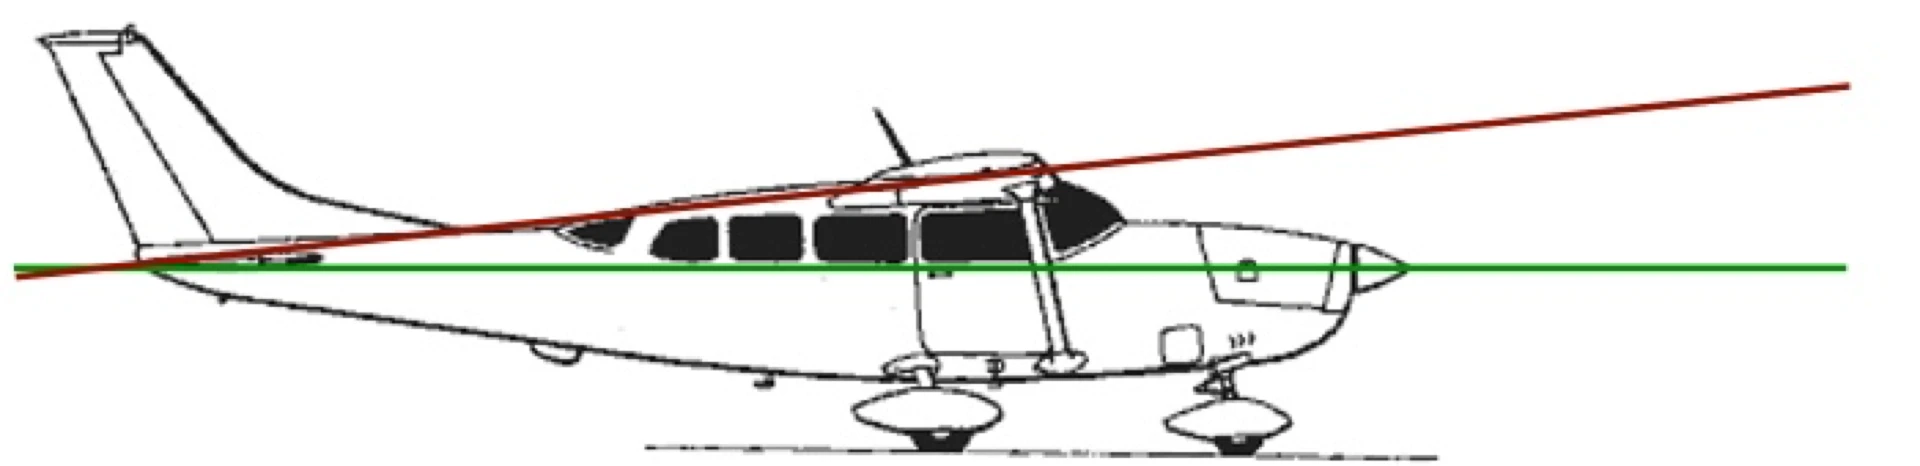 Cessna wing Angle of Incidence